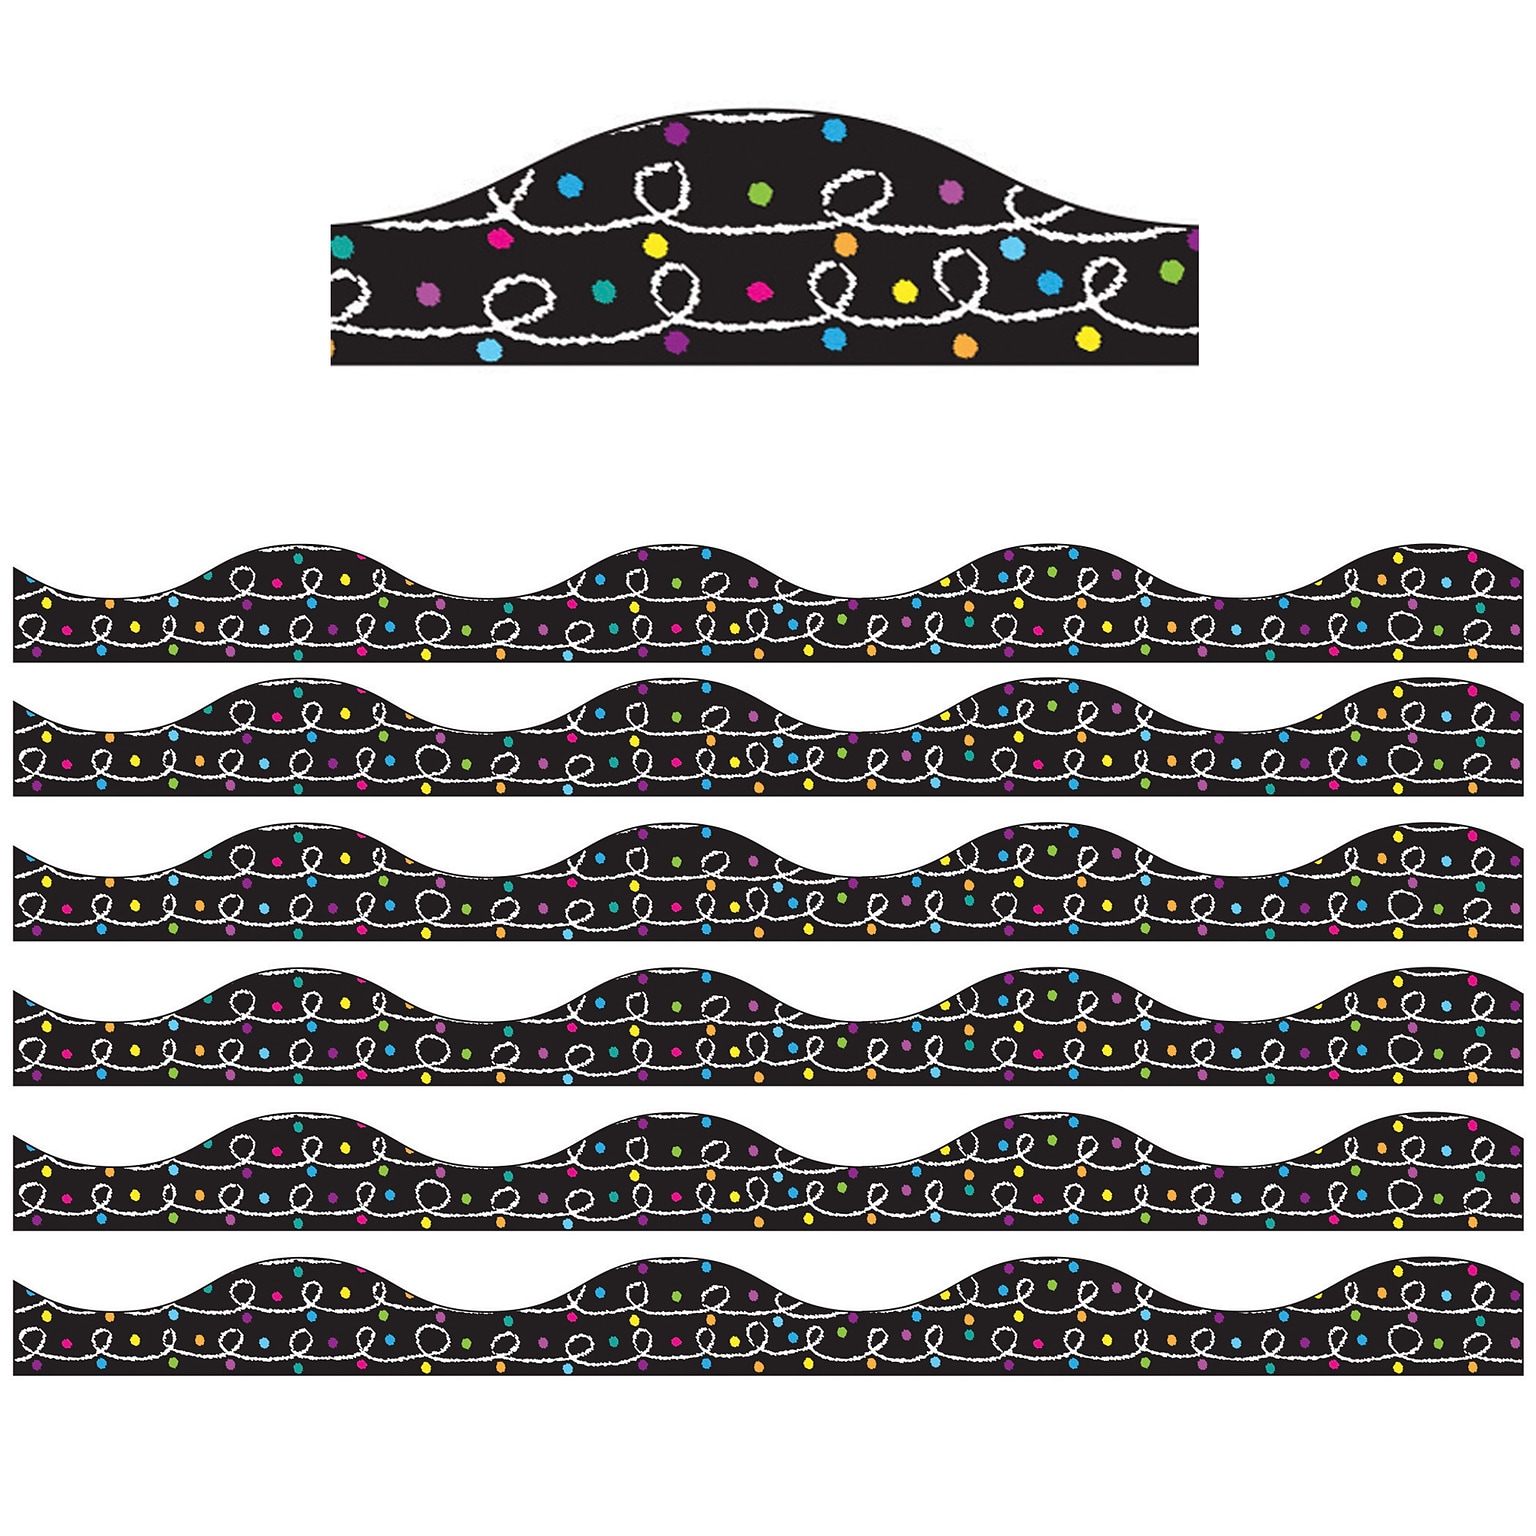 Ashley Productions Magnetic Scalloped Border, 1 x 72, White Chalk Loops with Color Chalk Dots on Black (ASH11430-6)